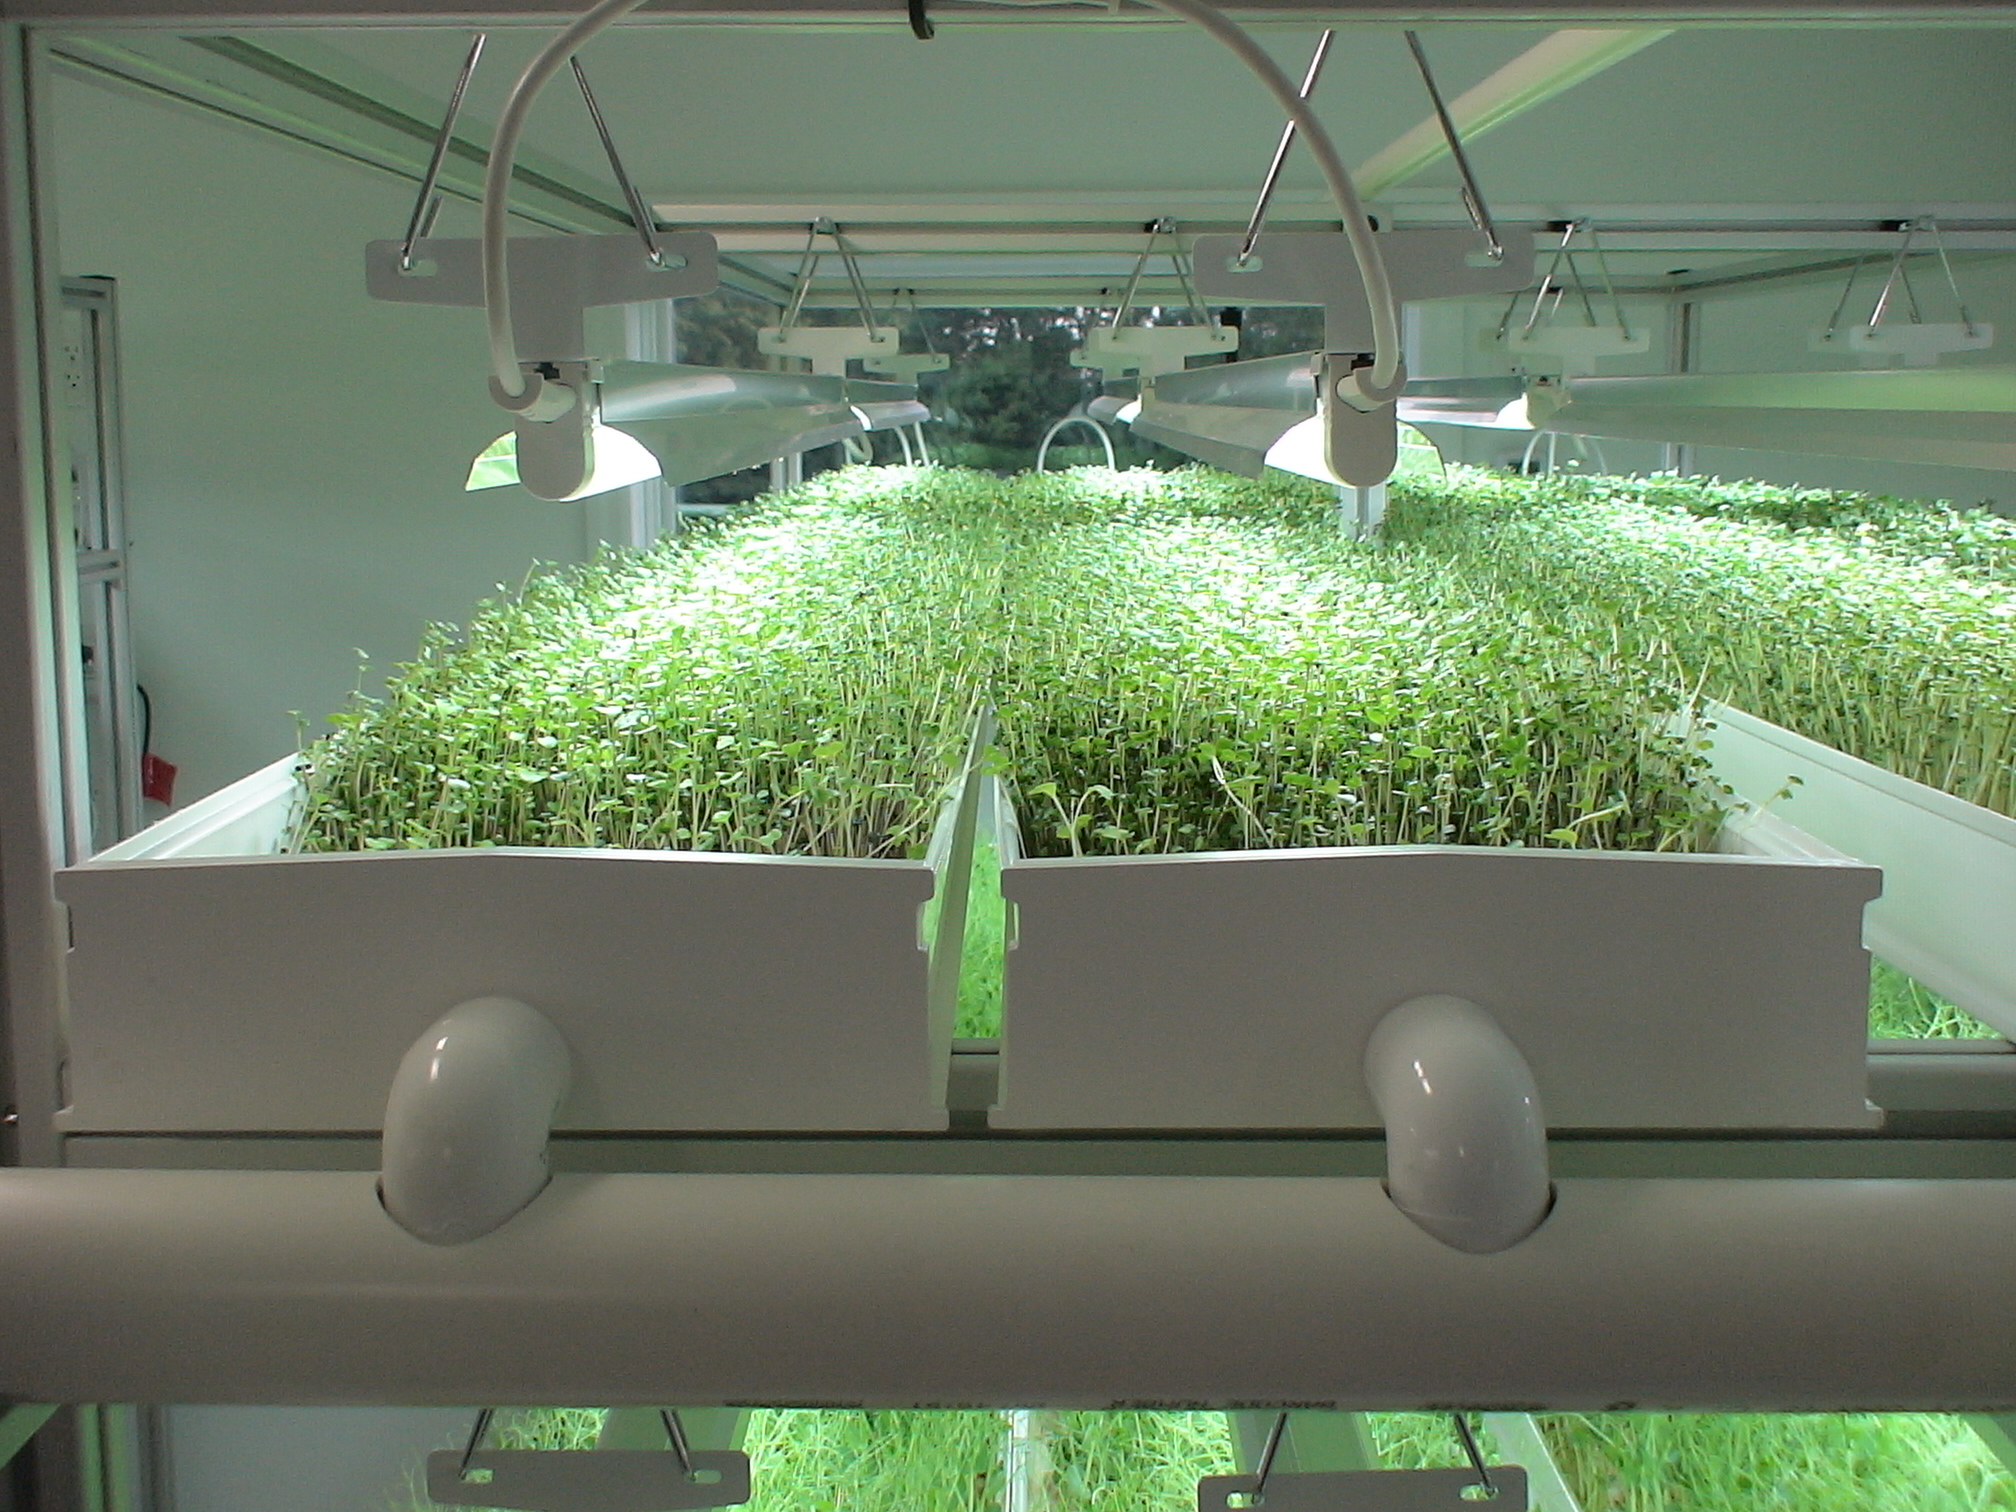 Growing microgreens in an NFT hydroponic system | Growers Supply